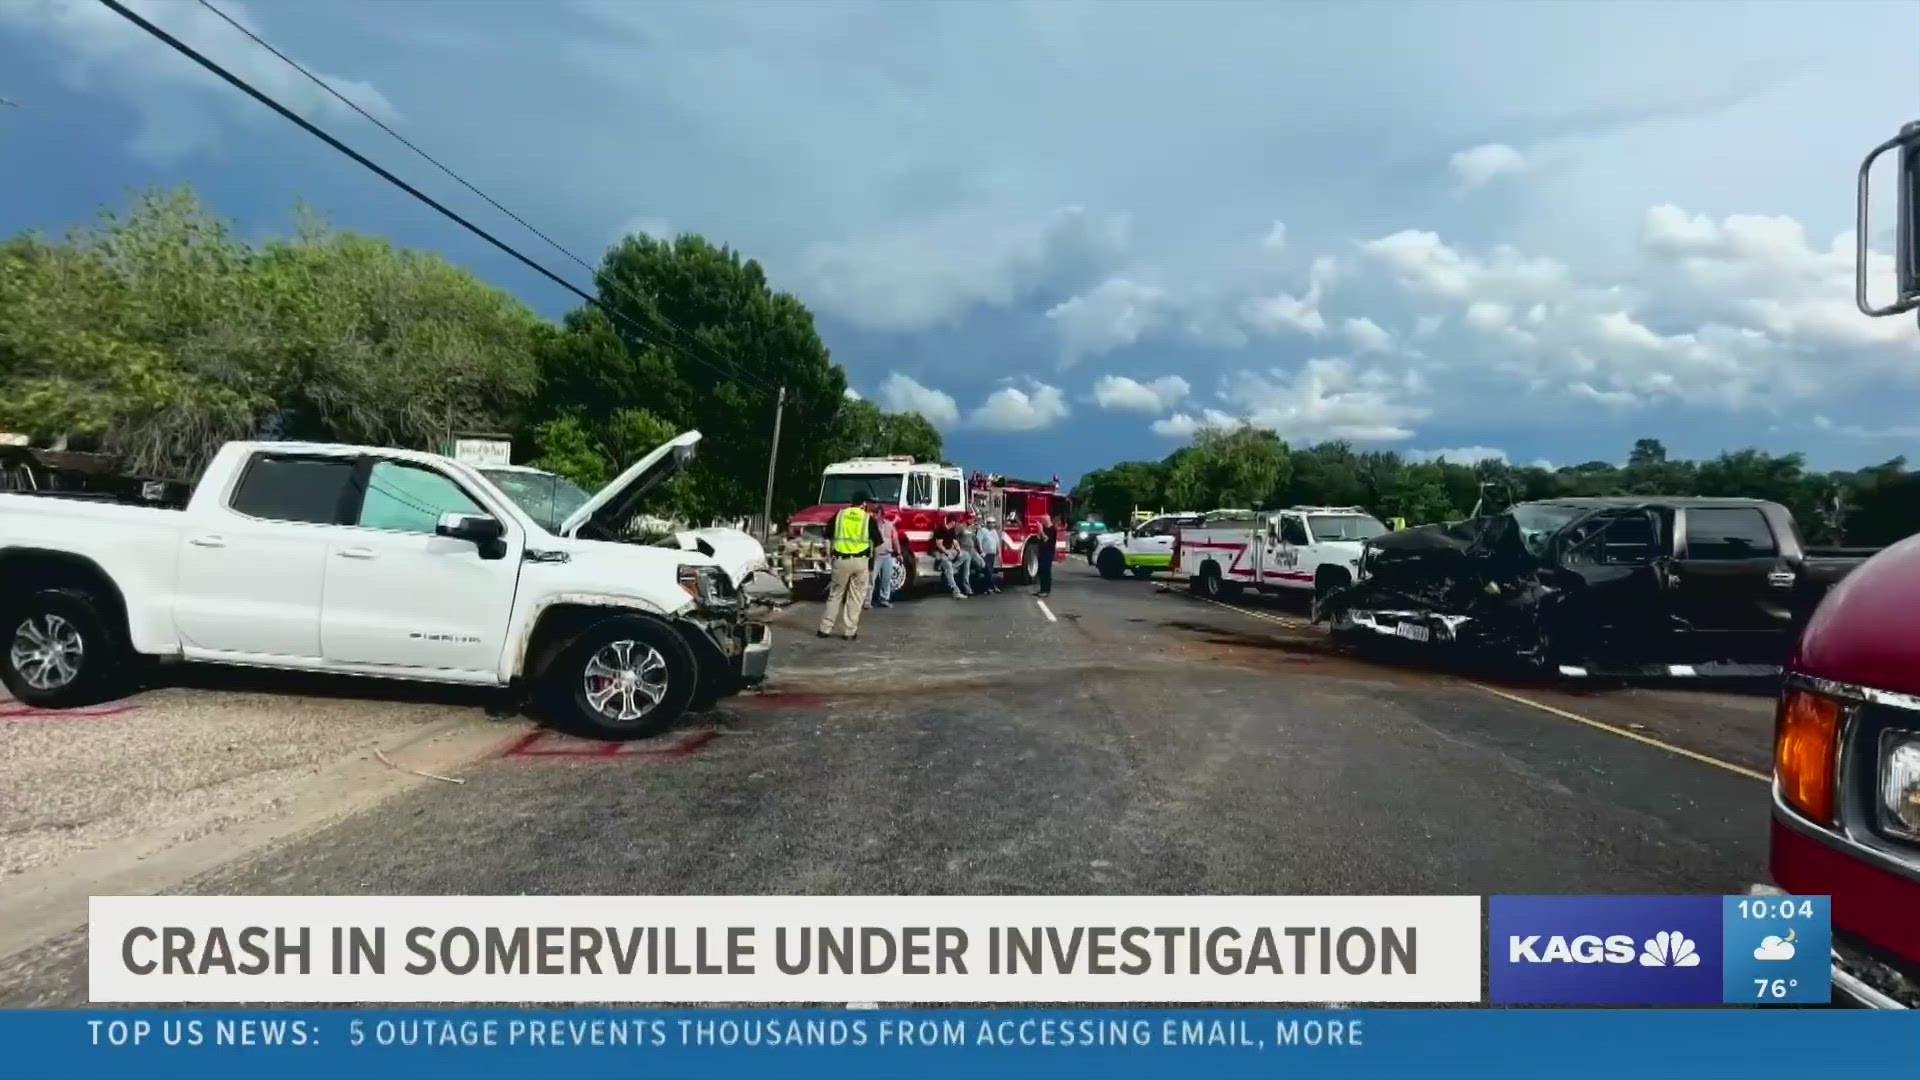 Somerville Police believe that there may have been another factor behind the crash that left one person dead and two others injured.